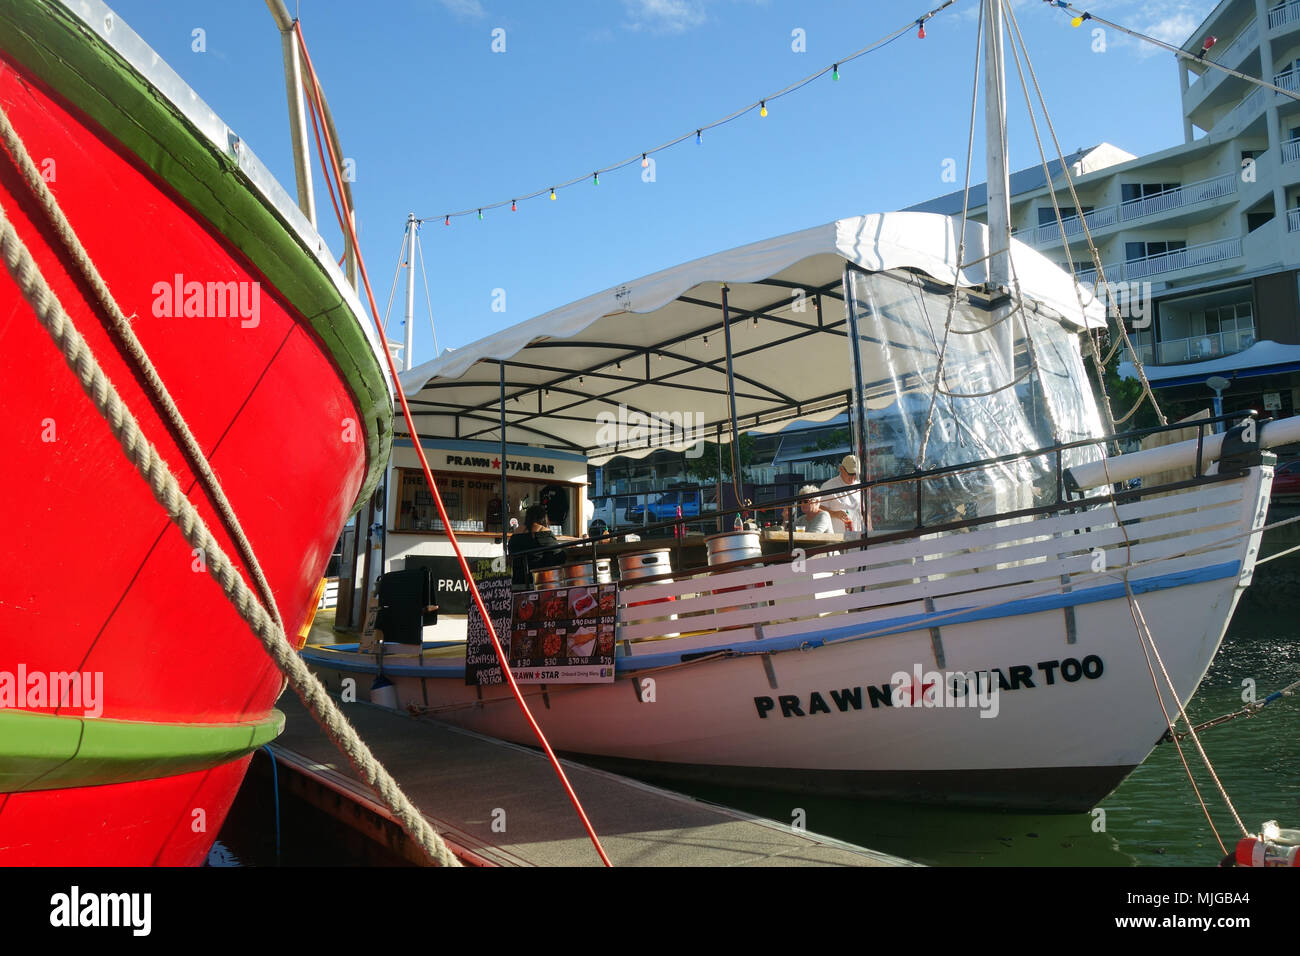 Floating seafood restaurant and bar Prawn Star Too in Cairns marina, Queensland, Australia. No MR or  PR Stock Photo